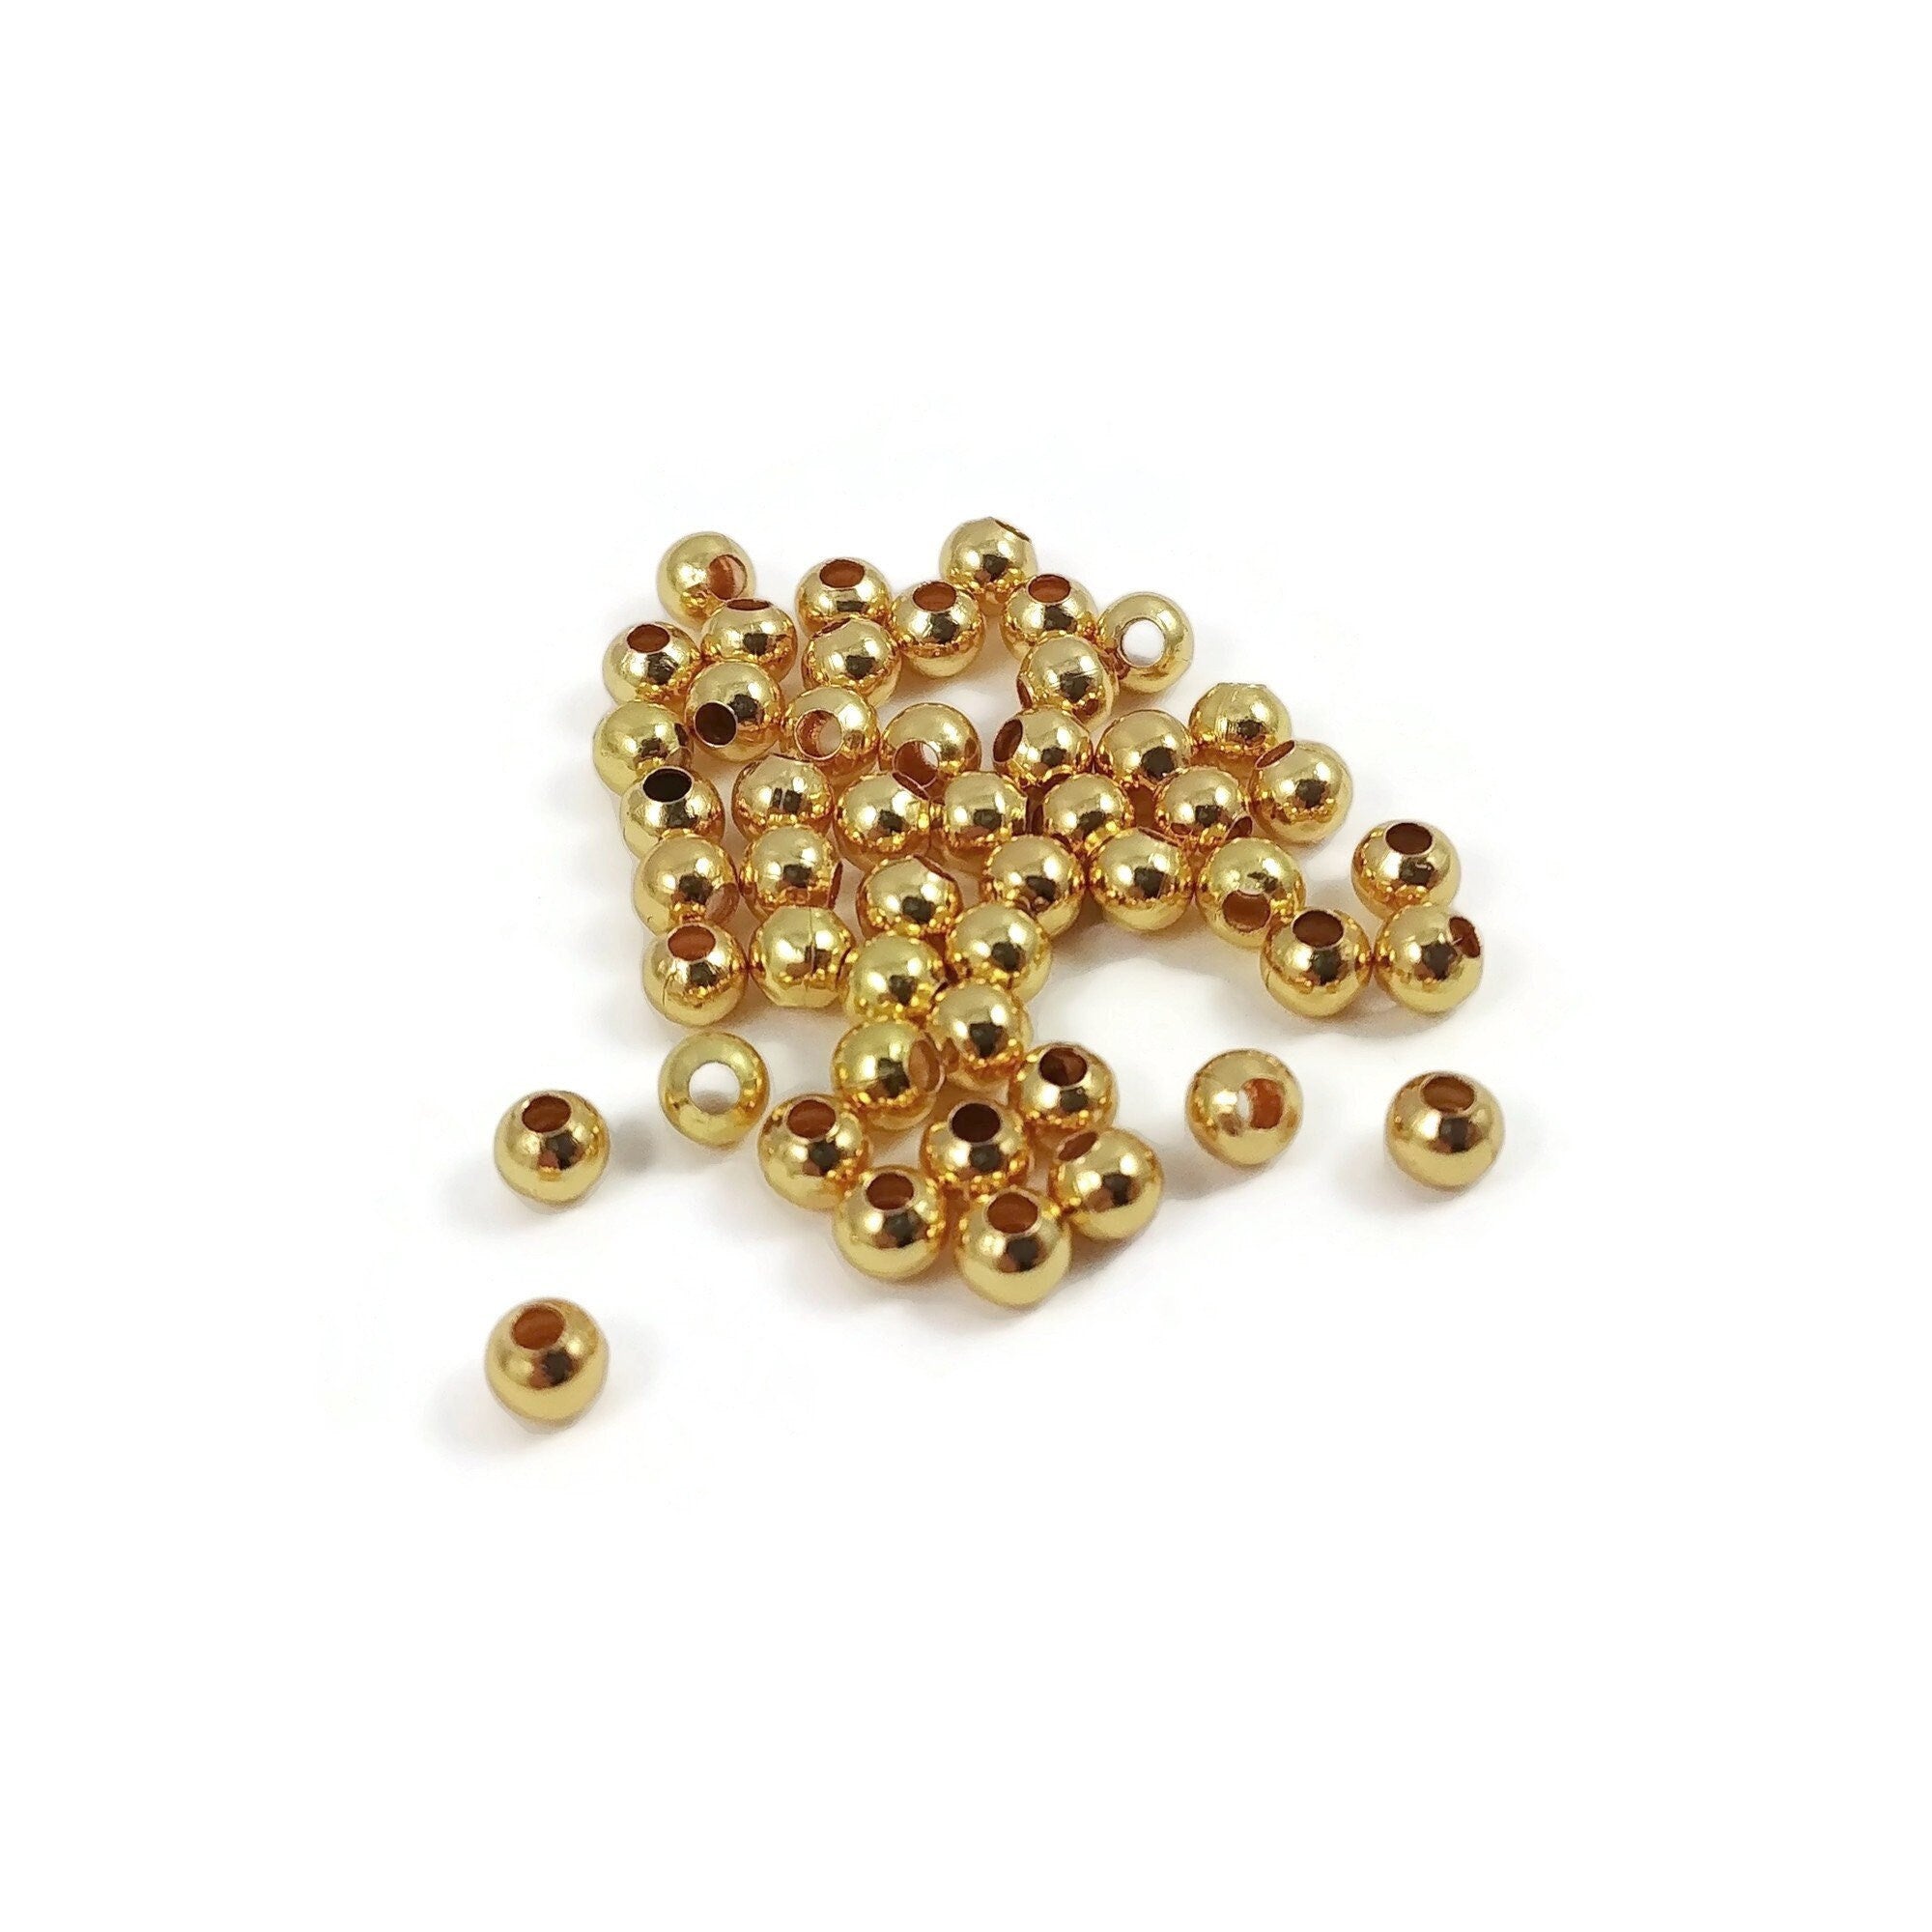 Black and Gold Faceted Rondelle Beads 6mm 15042